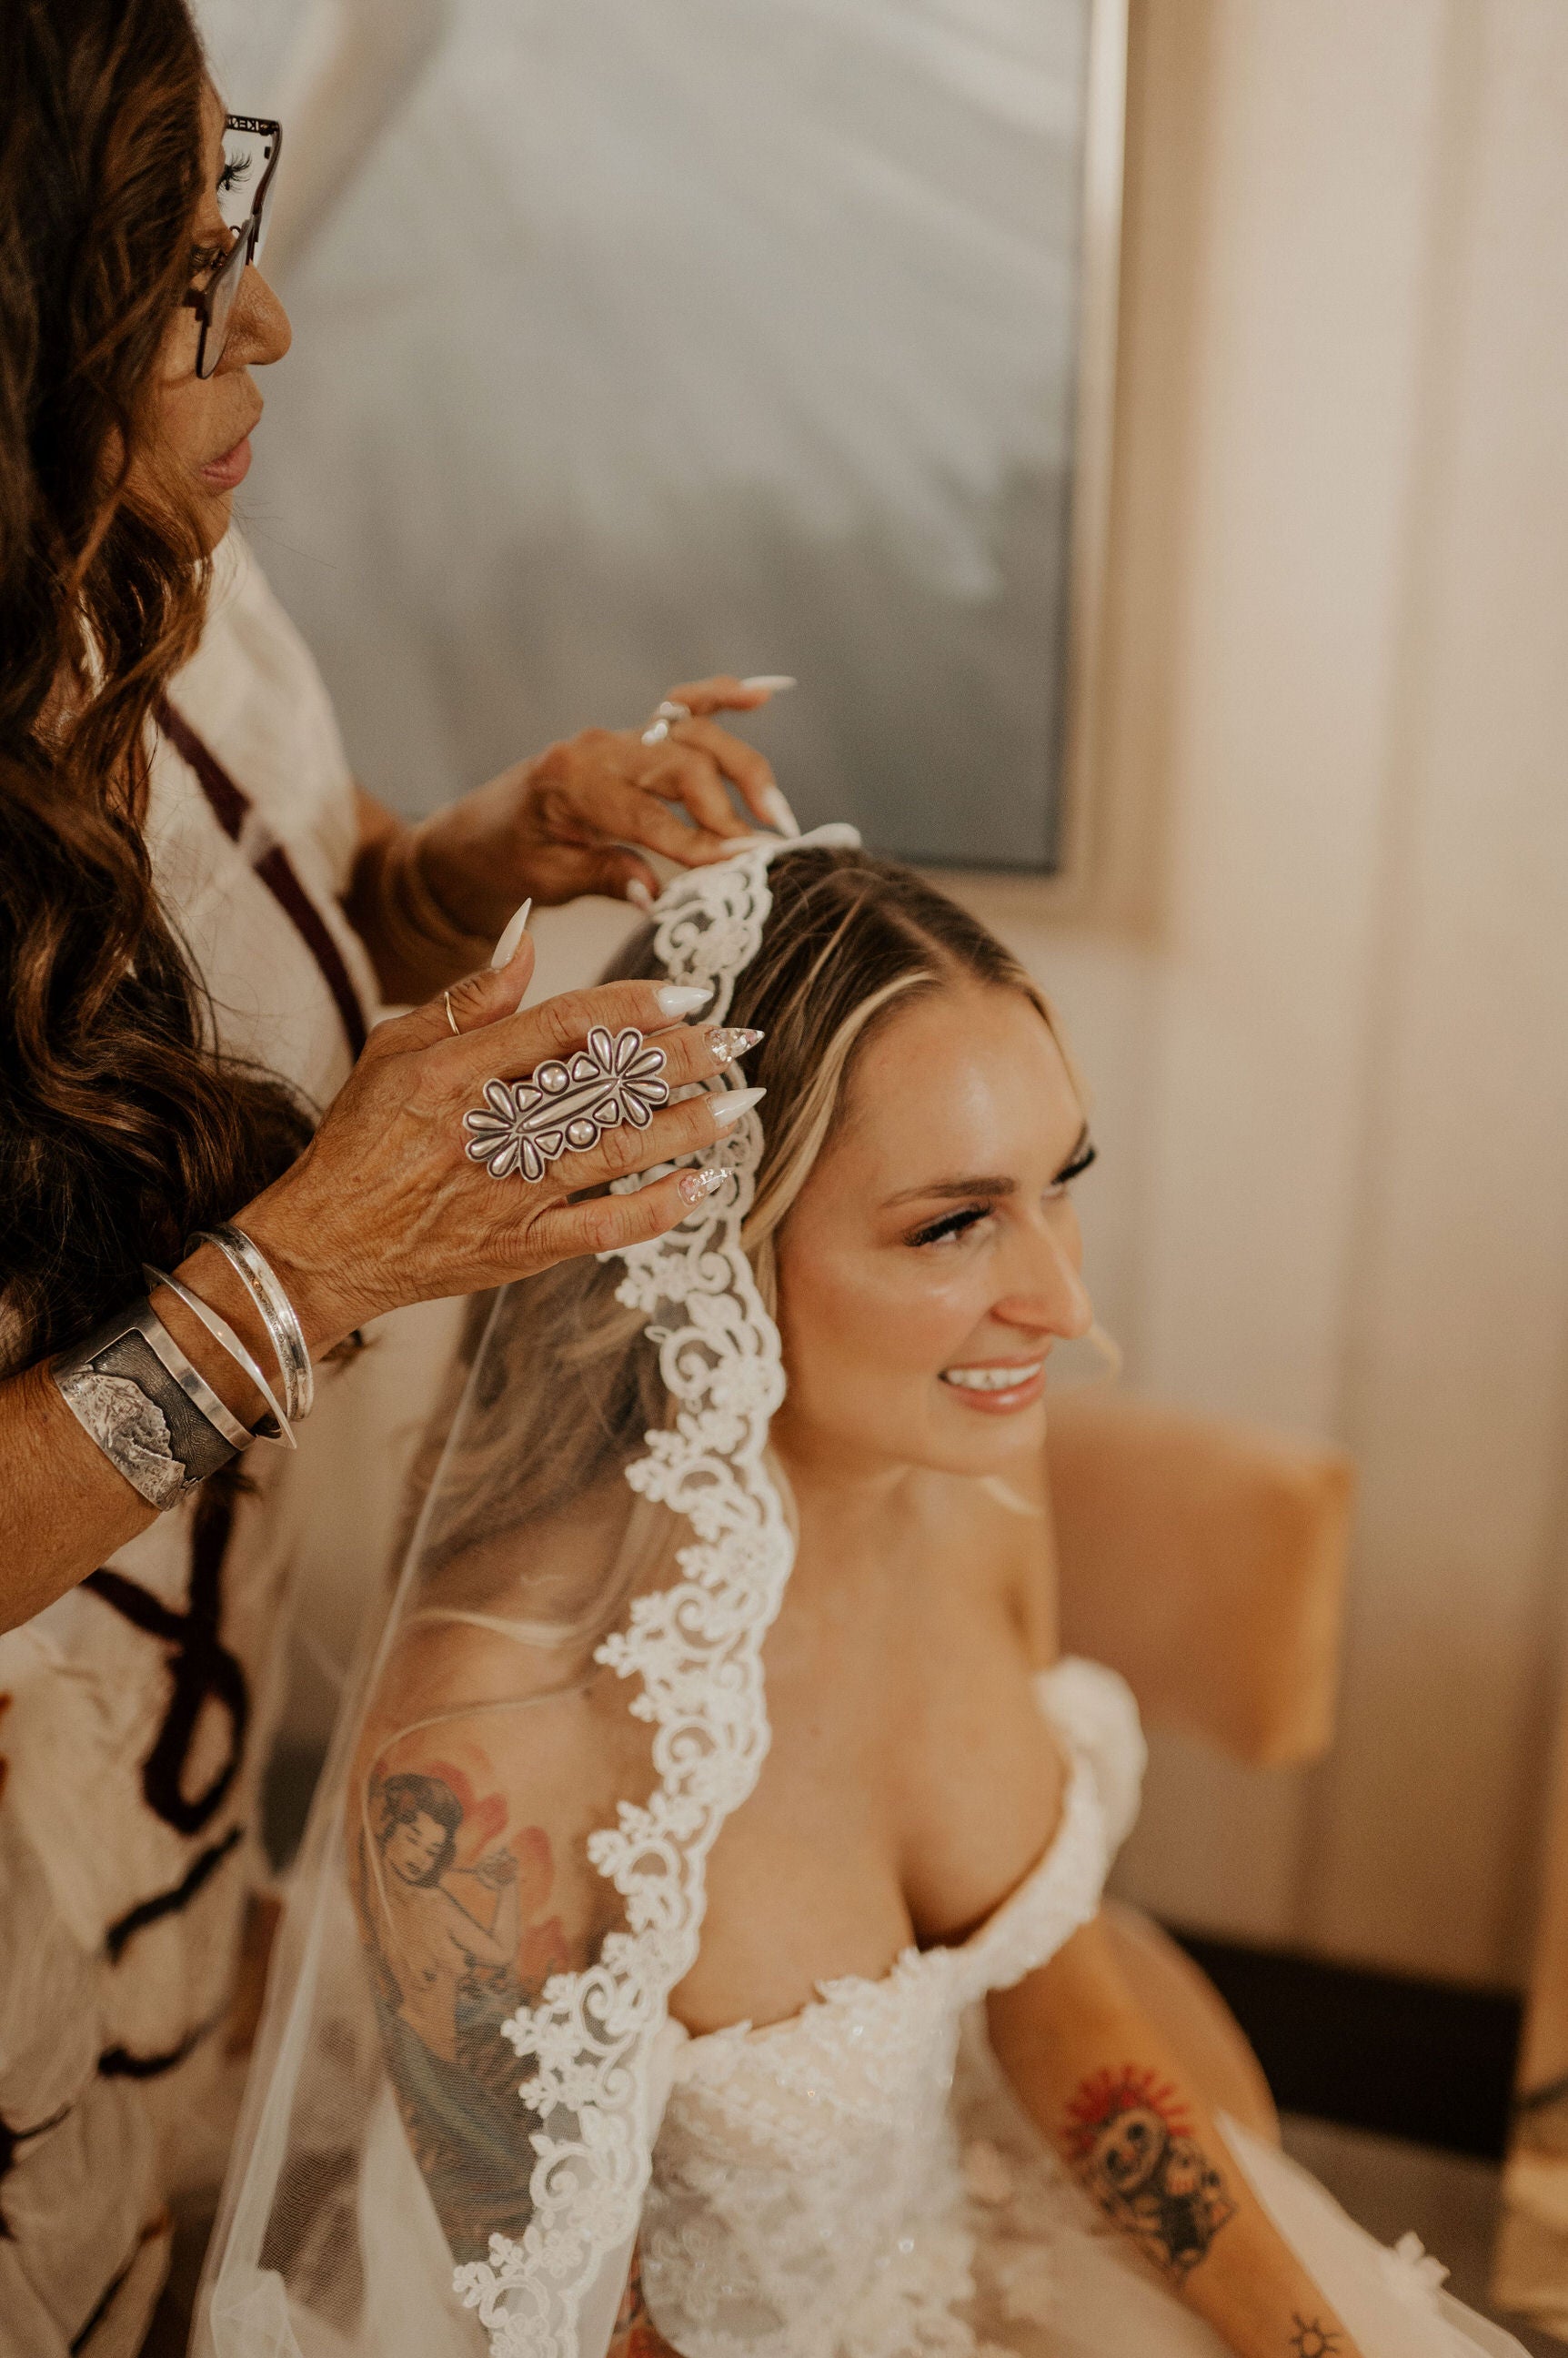 stylist positioning the mantilla wedding veil on top of curled hair down as bride smiles